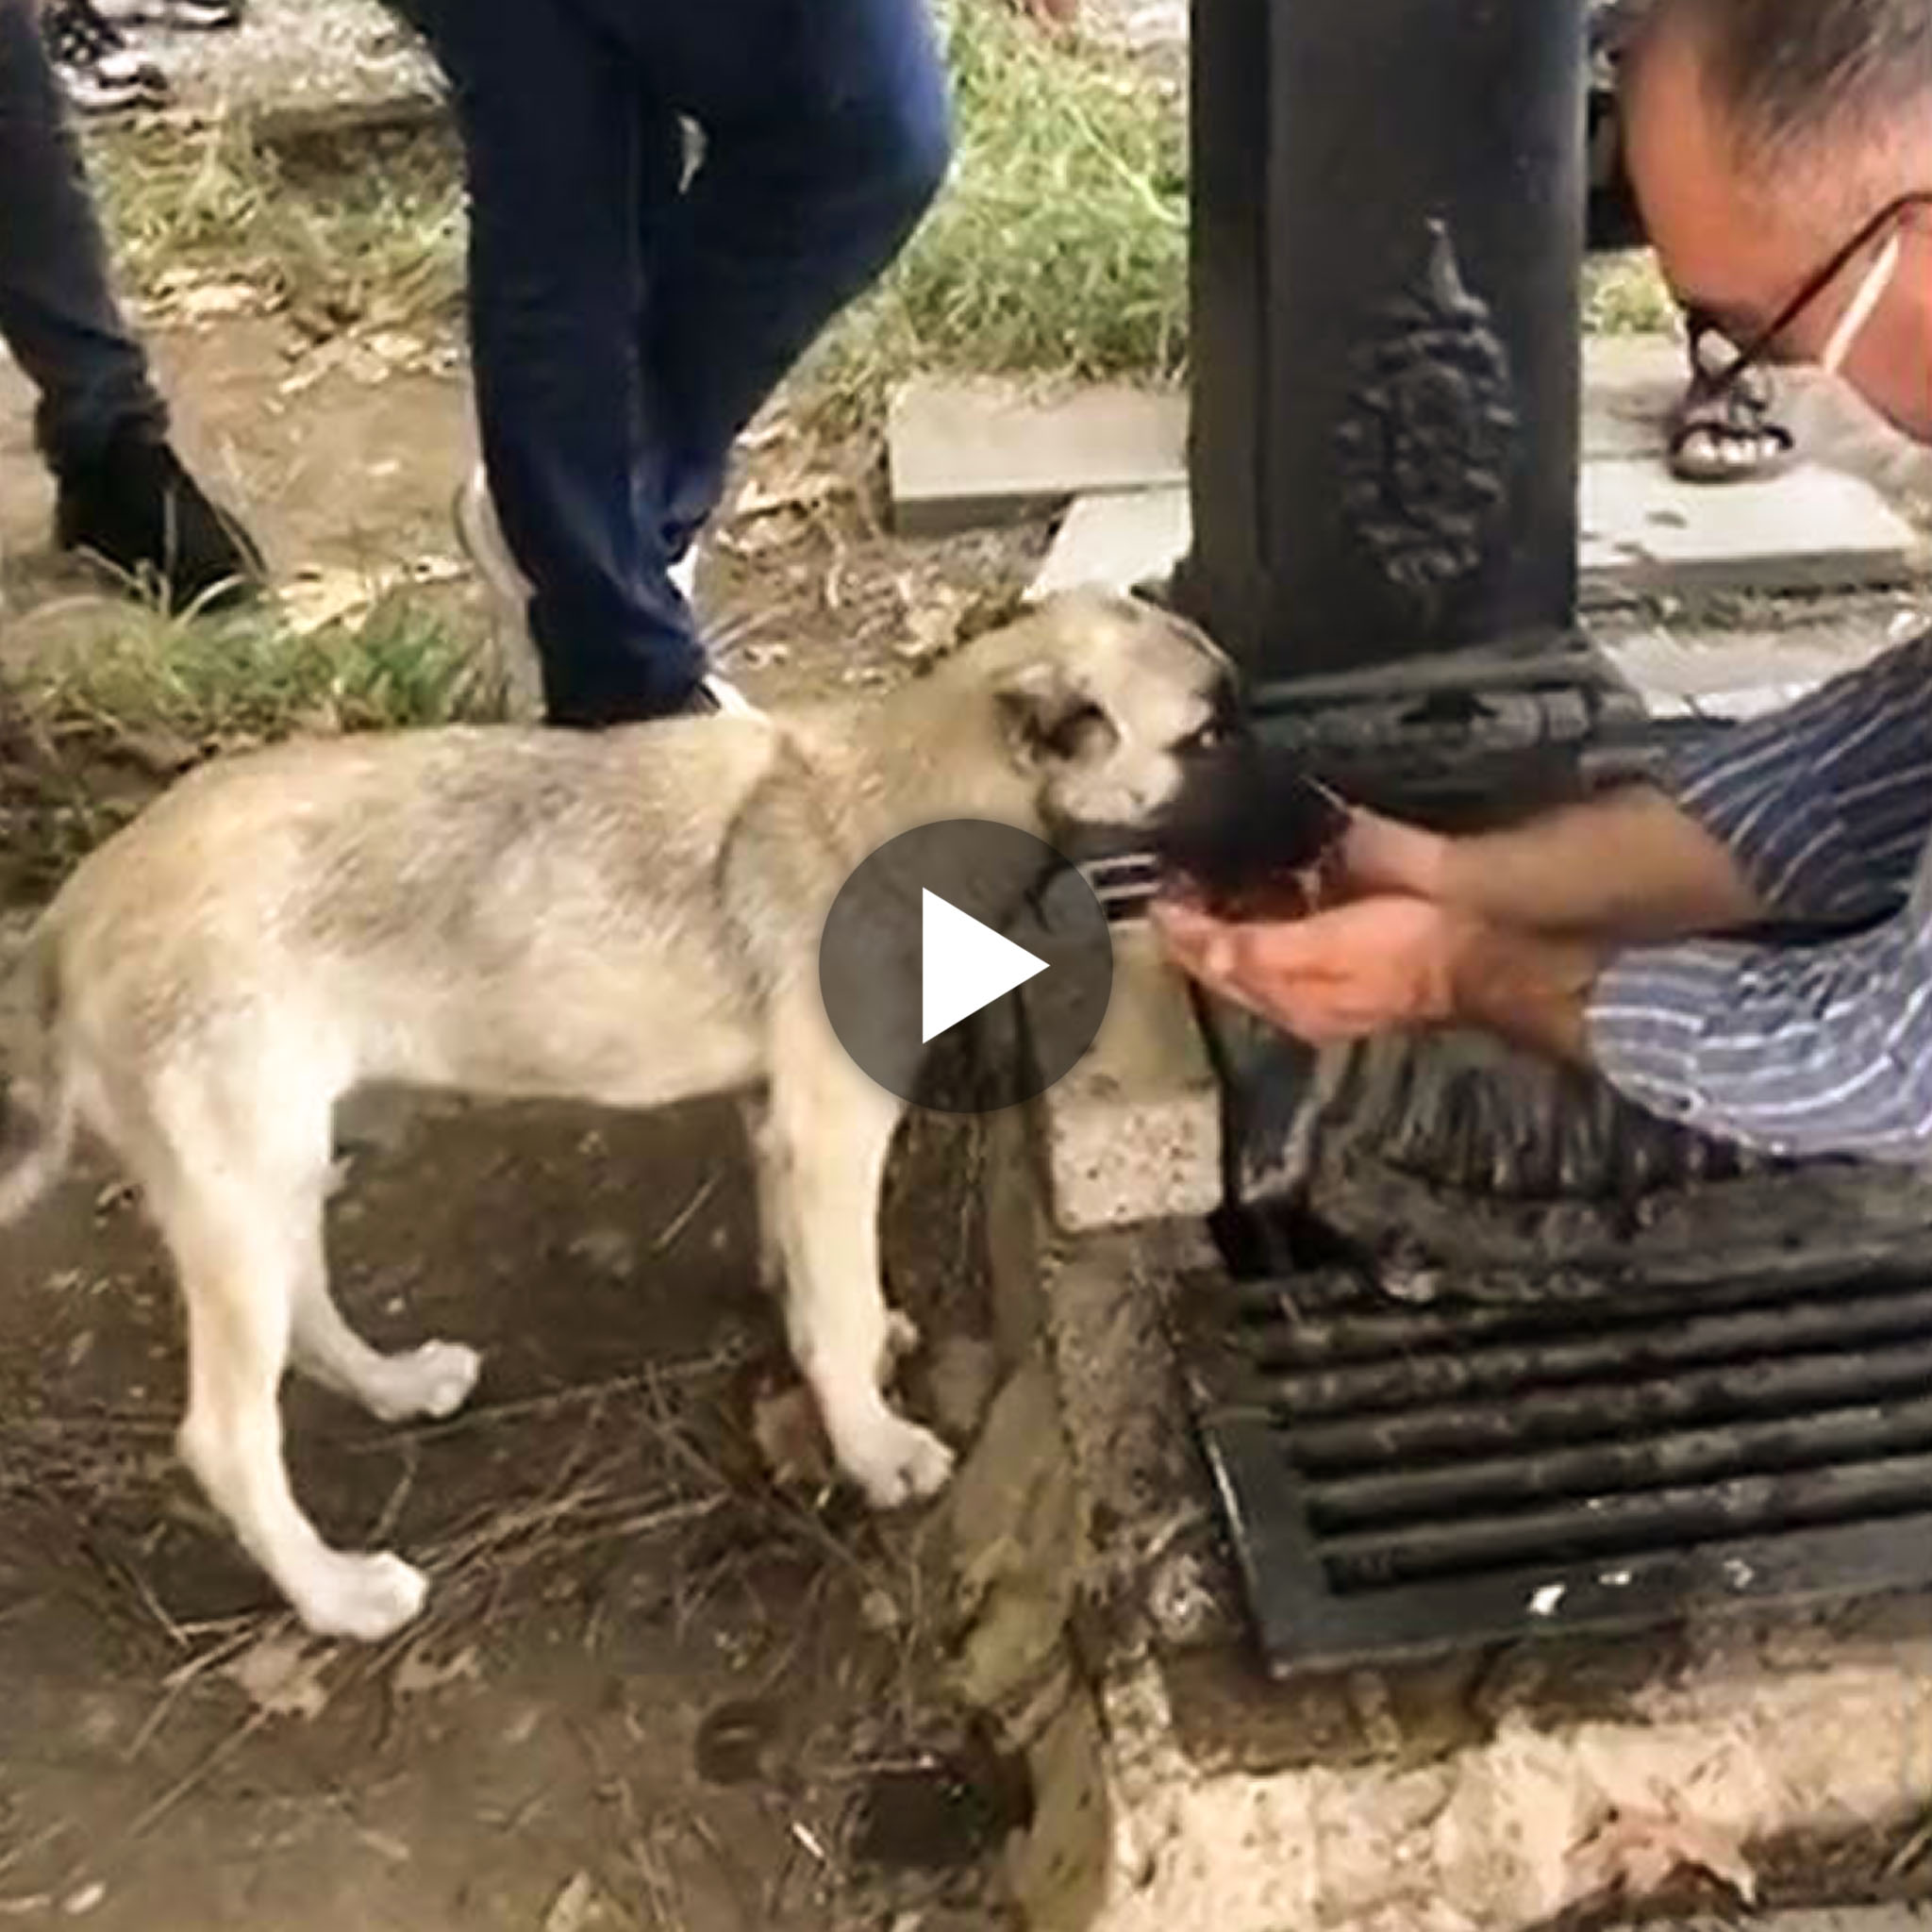 Heartwarming Gesture: Man’s Touching Act of Kindness Brings Water to a Thirsty Street Dog (VIDEO).